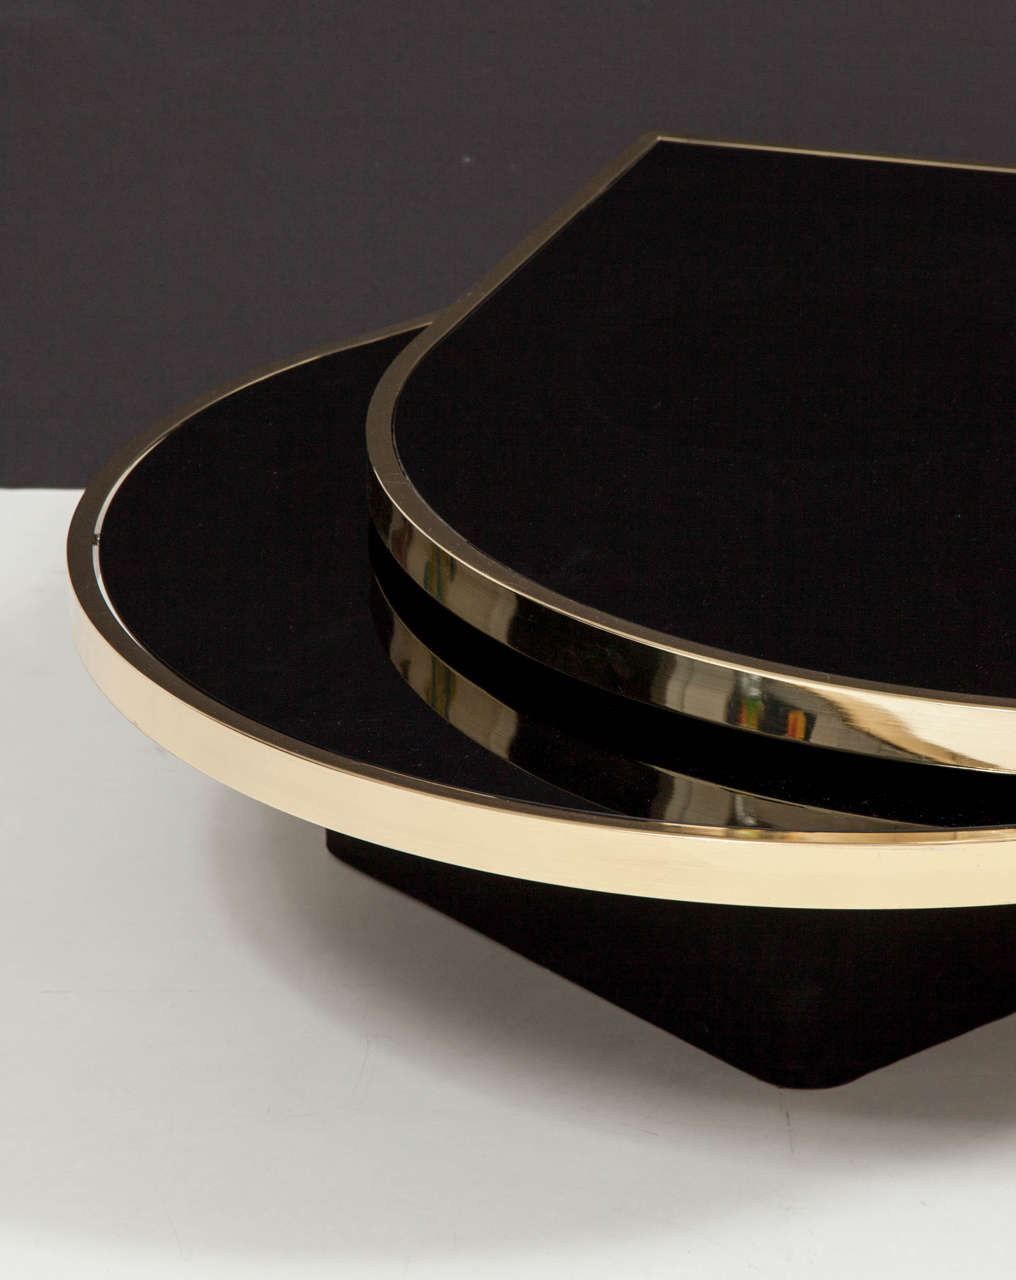 20th Century Black Glass and Brass Teardrop Swivel Cocktail Table by DIA, Signed